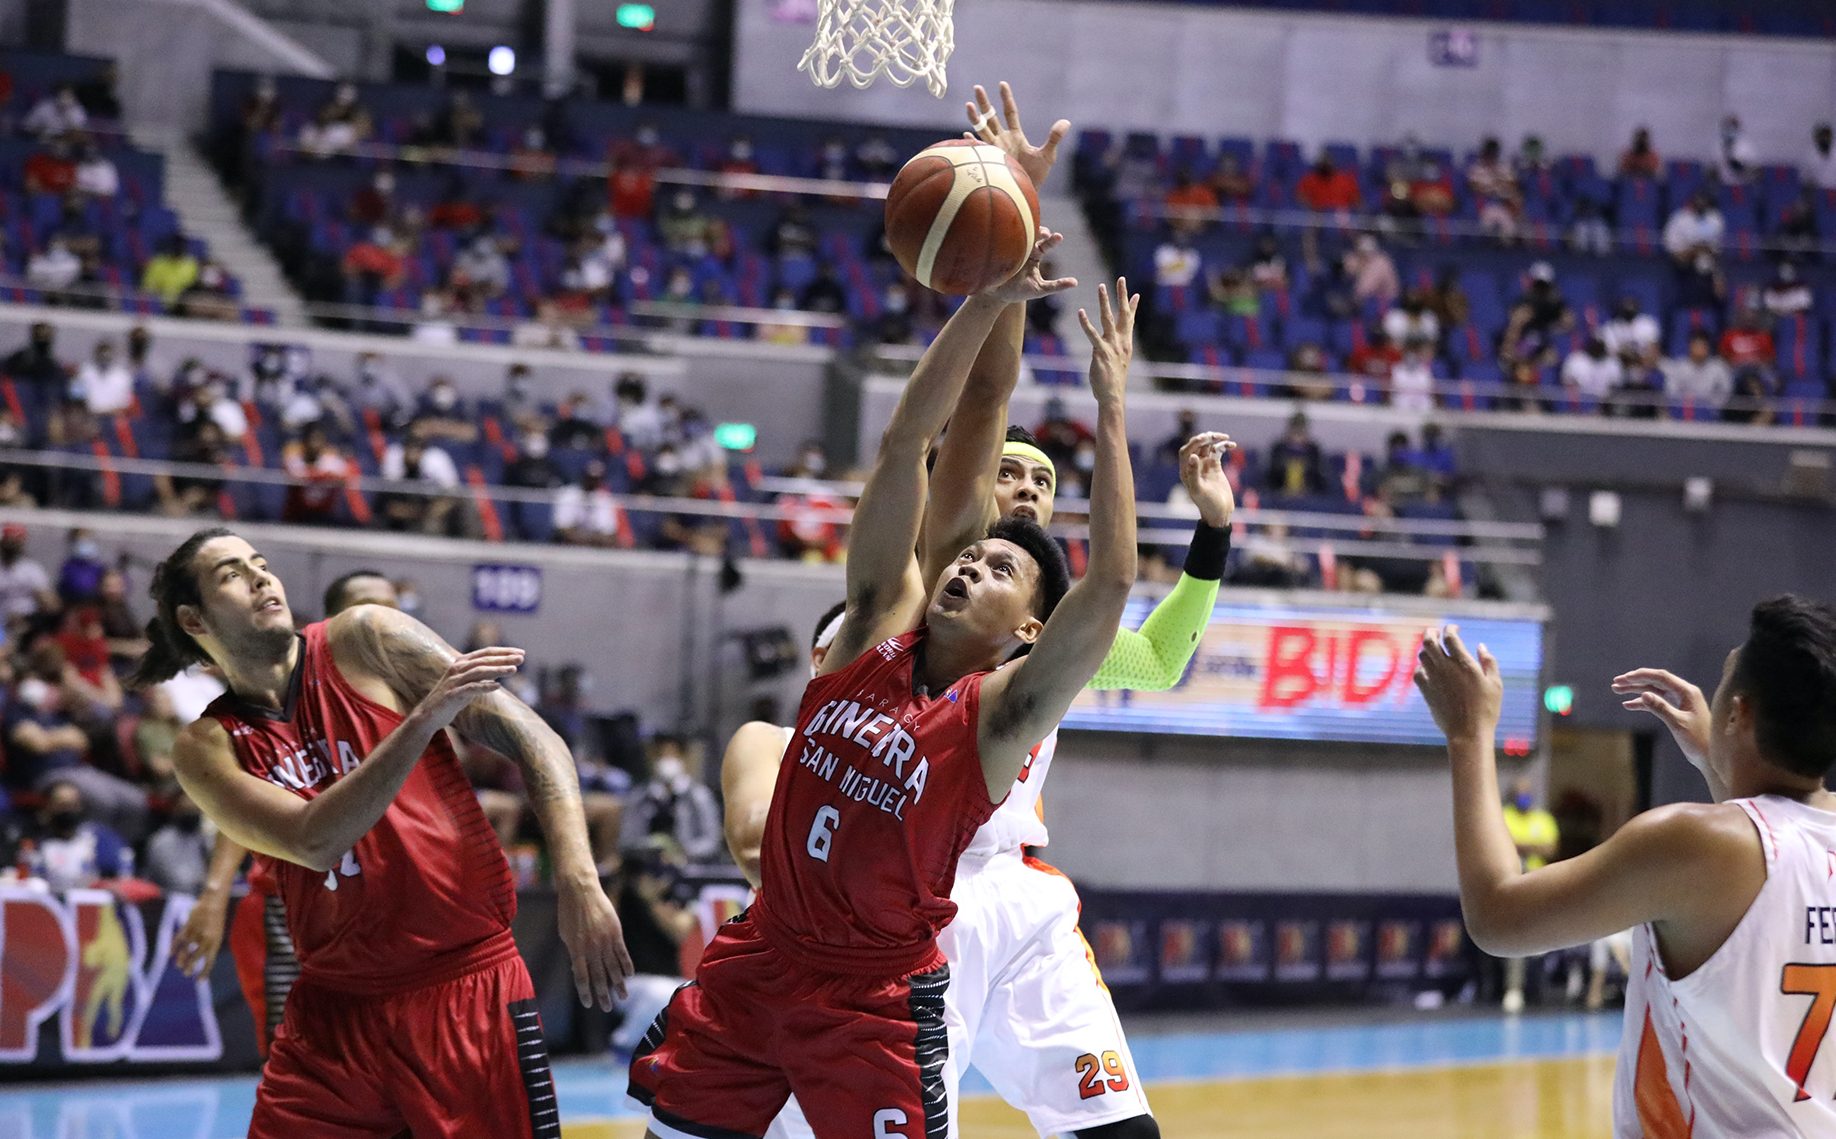 Presence of newlywed Thompson ‘crucial’ for injury-riddled Ginebra, says Cone